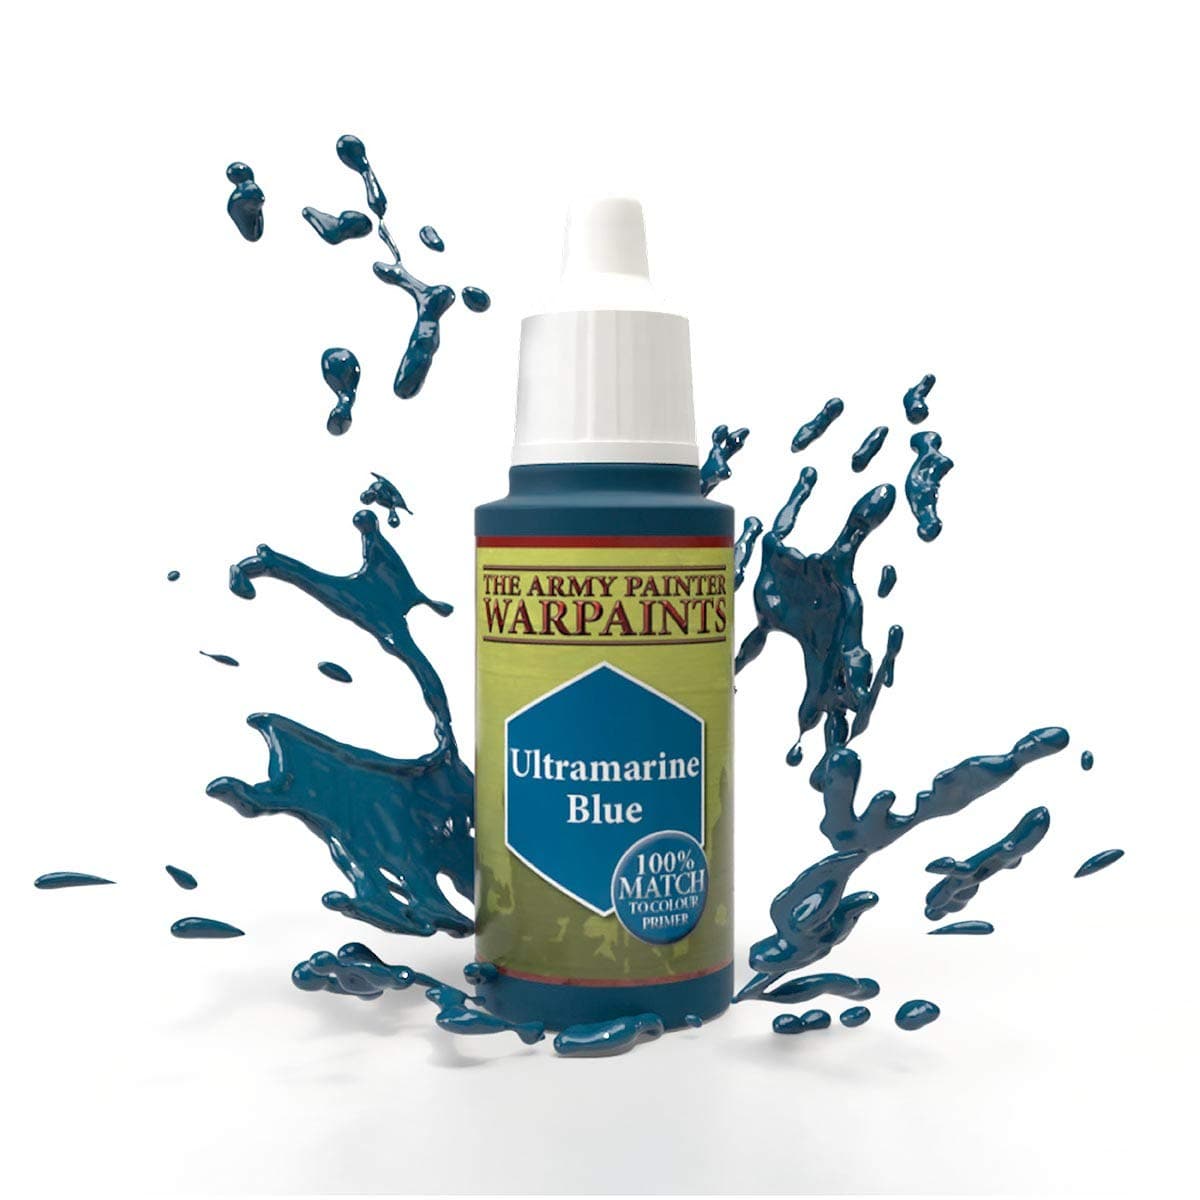 The Army Painter Accessories The Army Painter Warpaints: Ultramarine Blue 18ml